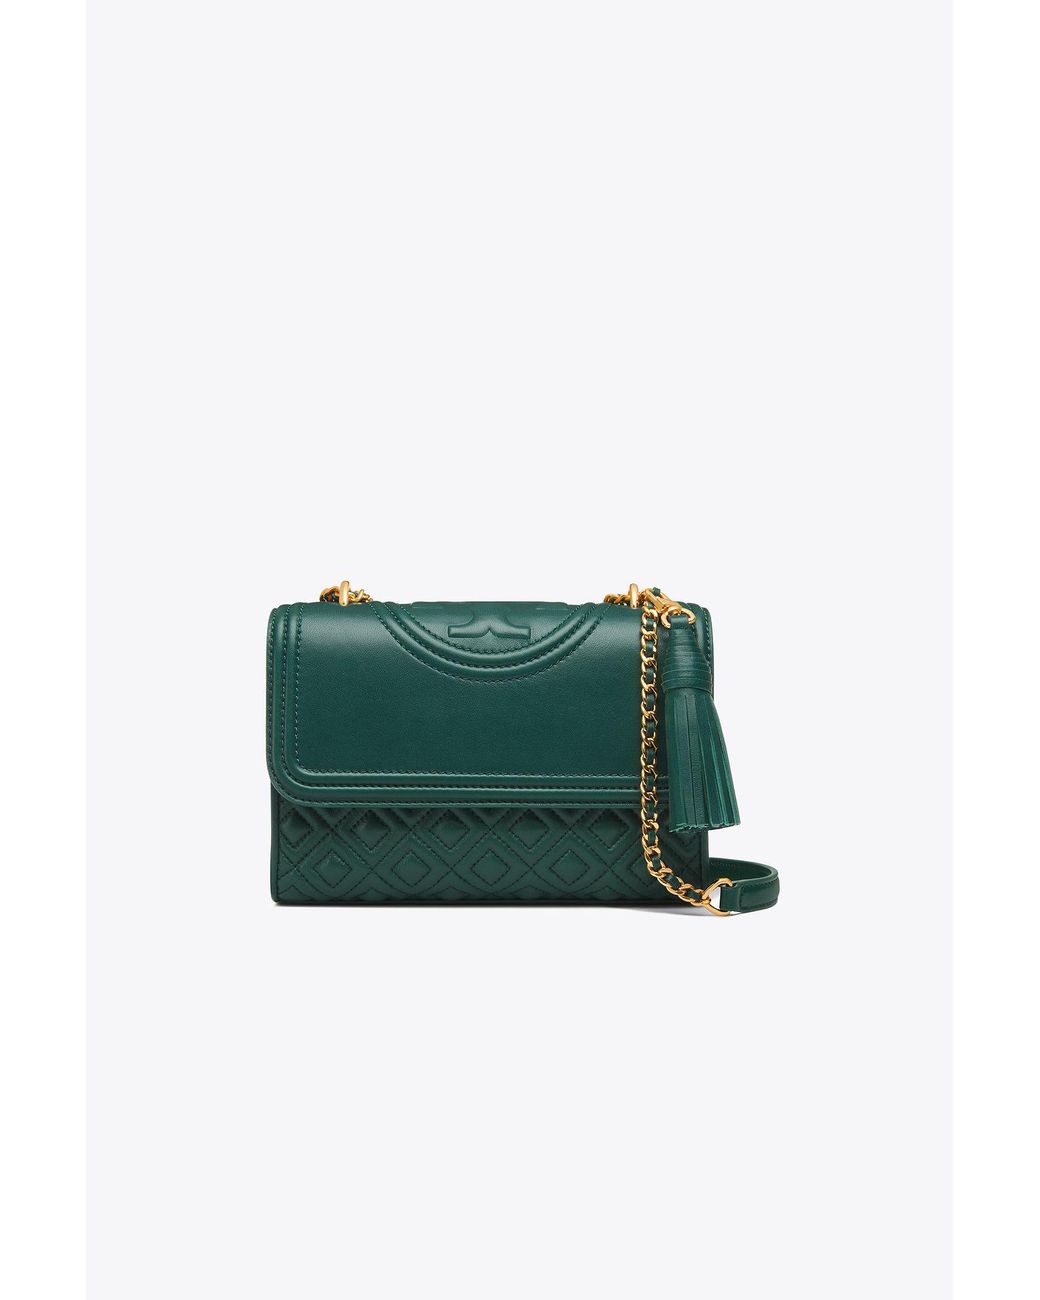 Tory Burch Fleming Small Convertible Shoulder Bag in Green | Lyst